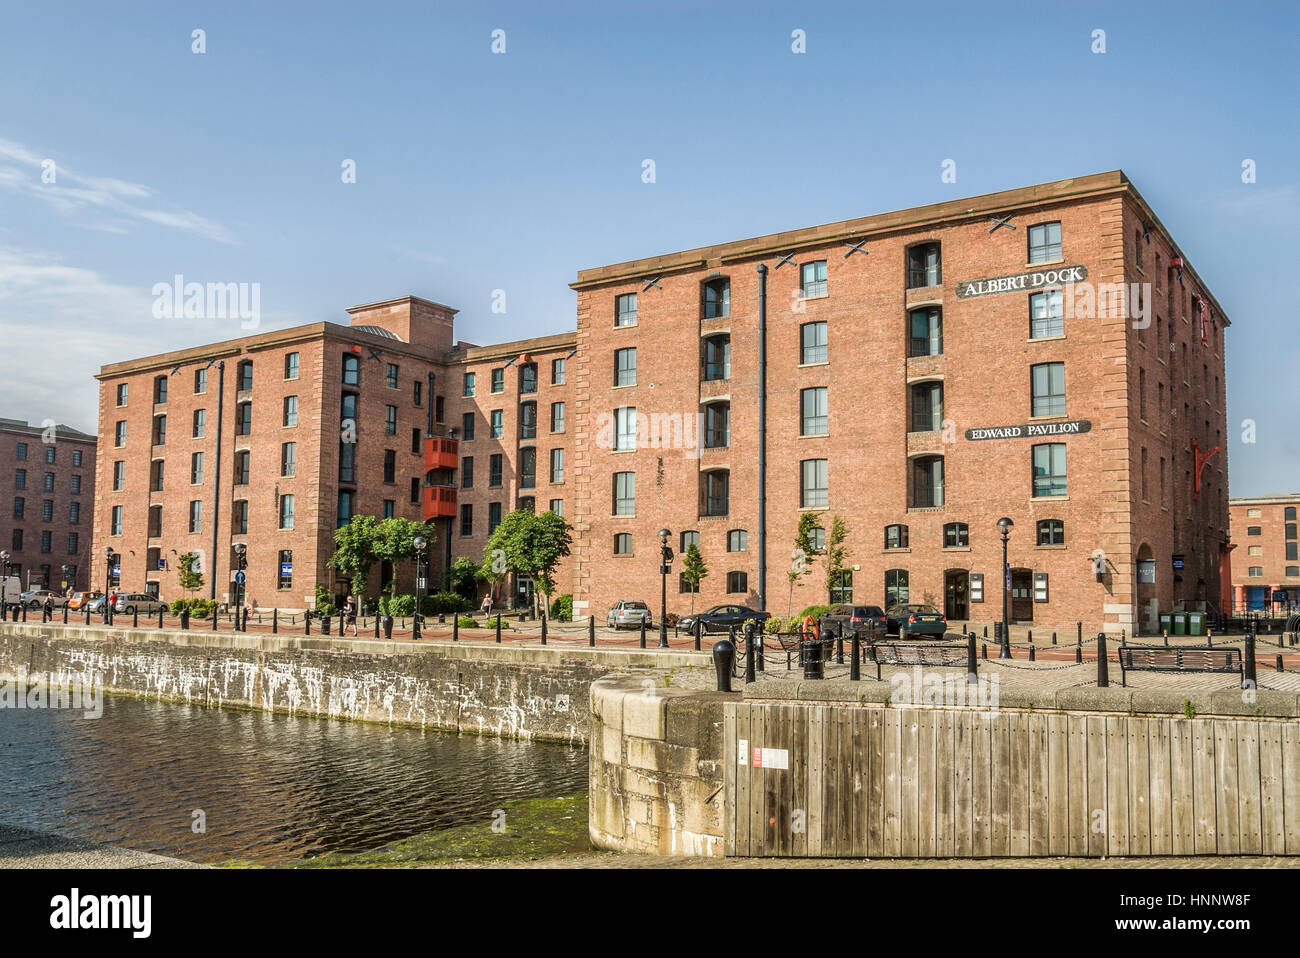 The Albert Dock is a complex of dock buildings and warehouses in Liverpool, England. Stock Photo